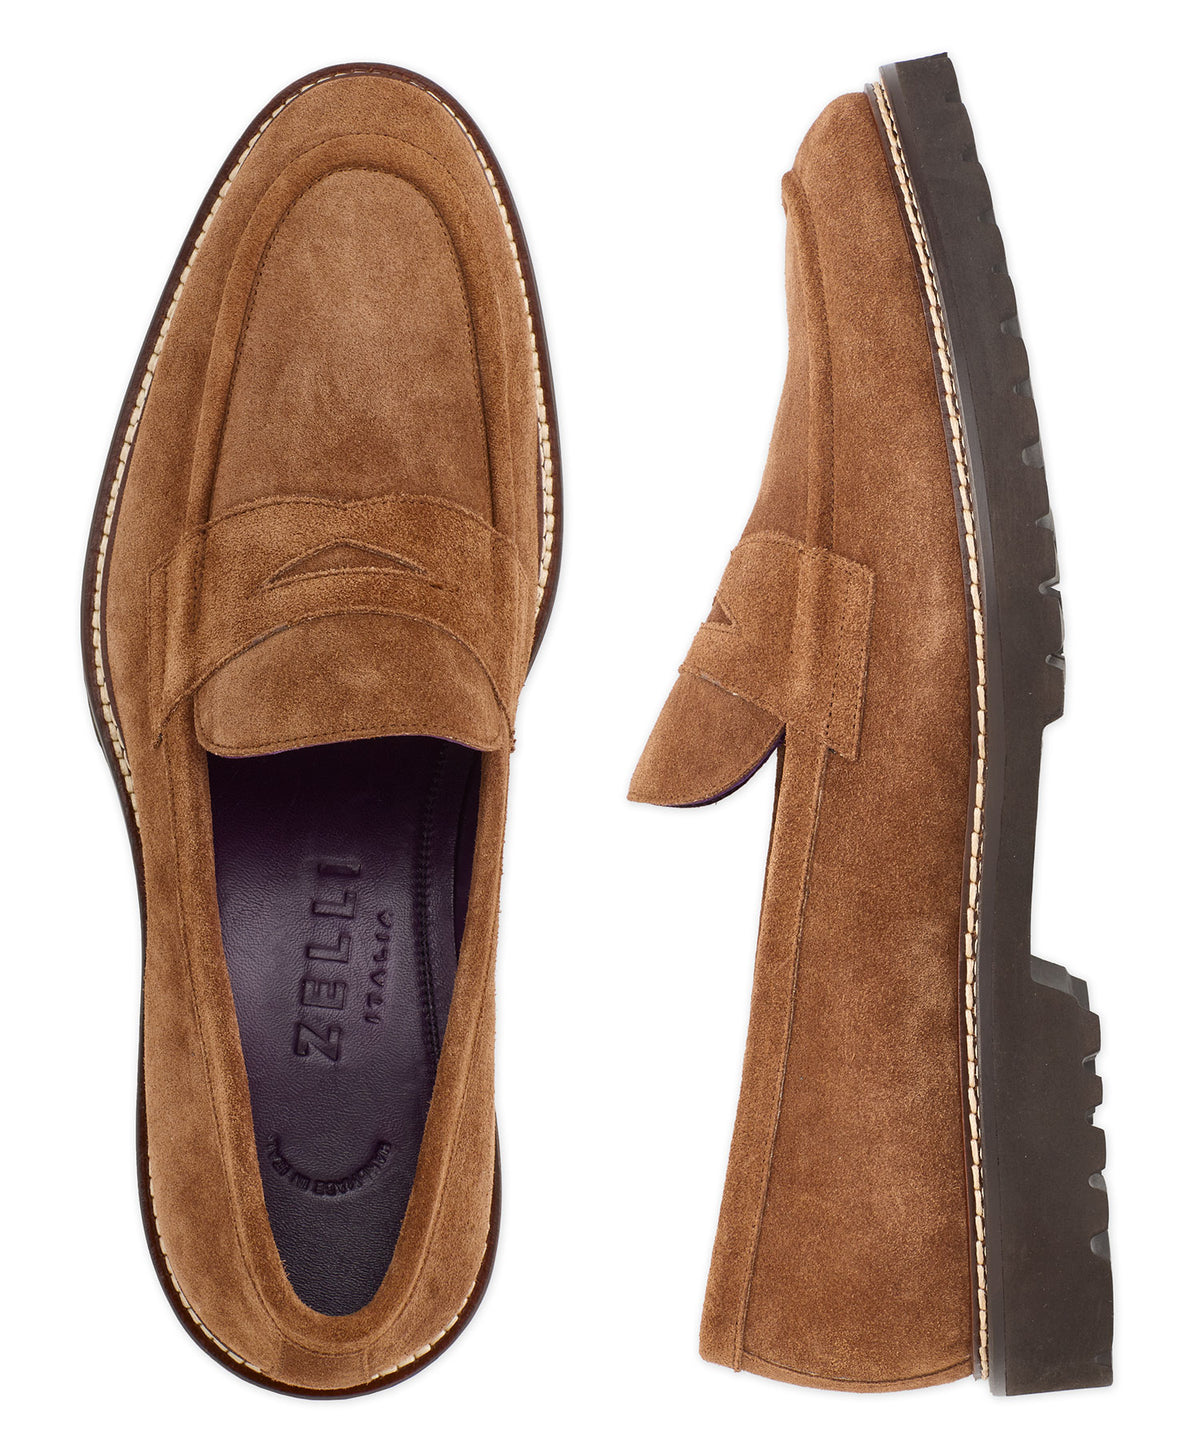 Zelli Roma Countryside Suede Lug Sole Loafer